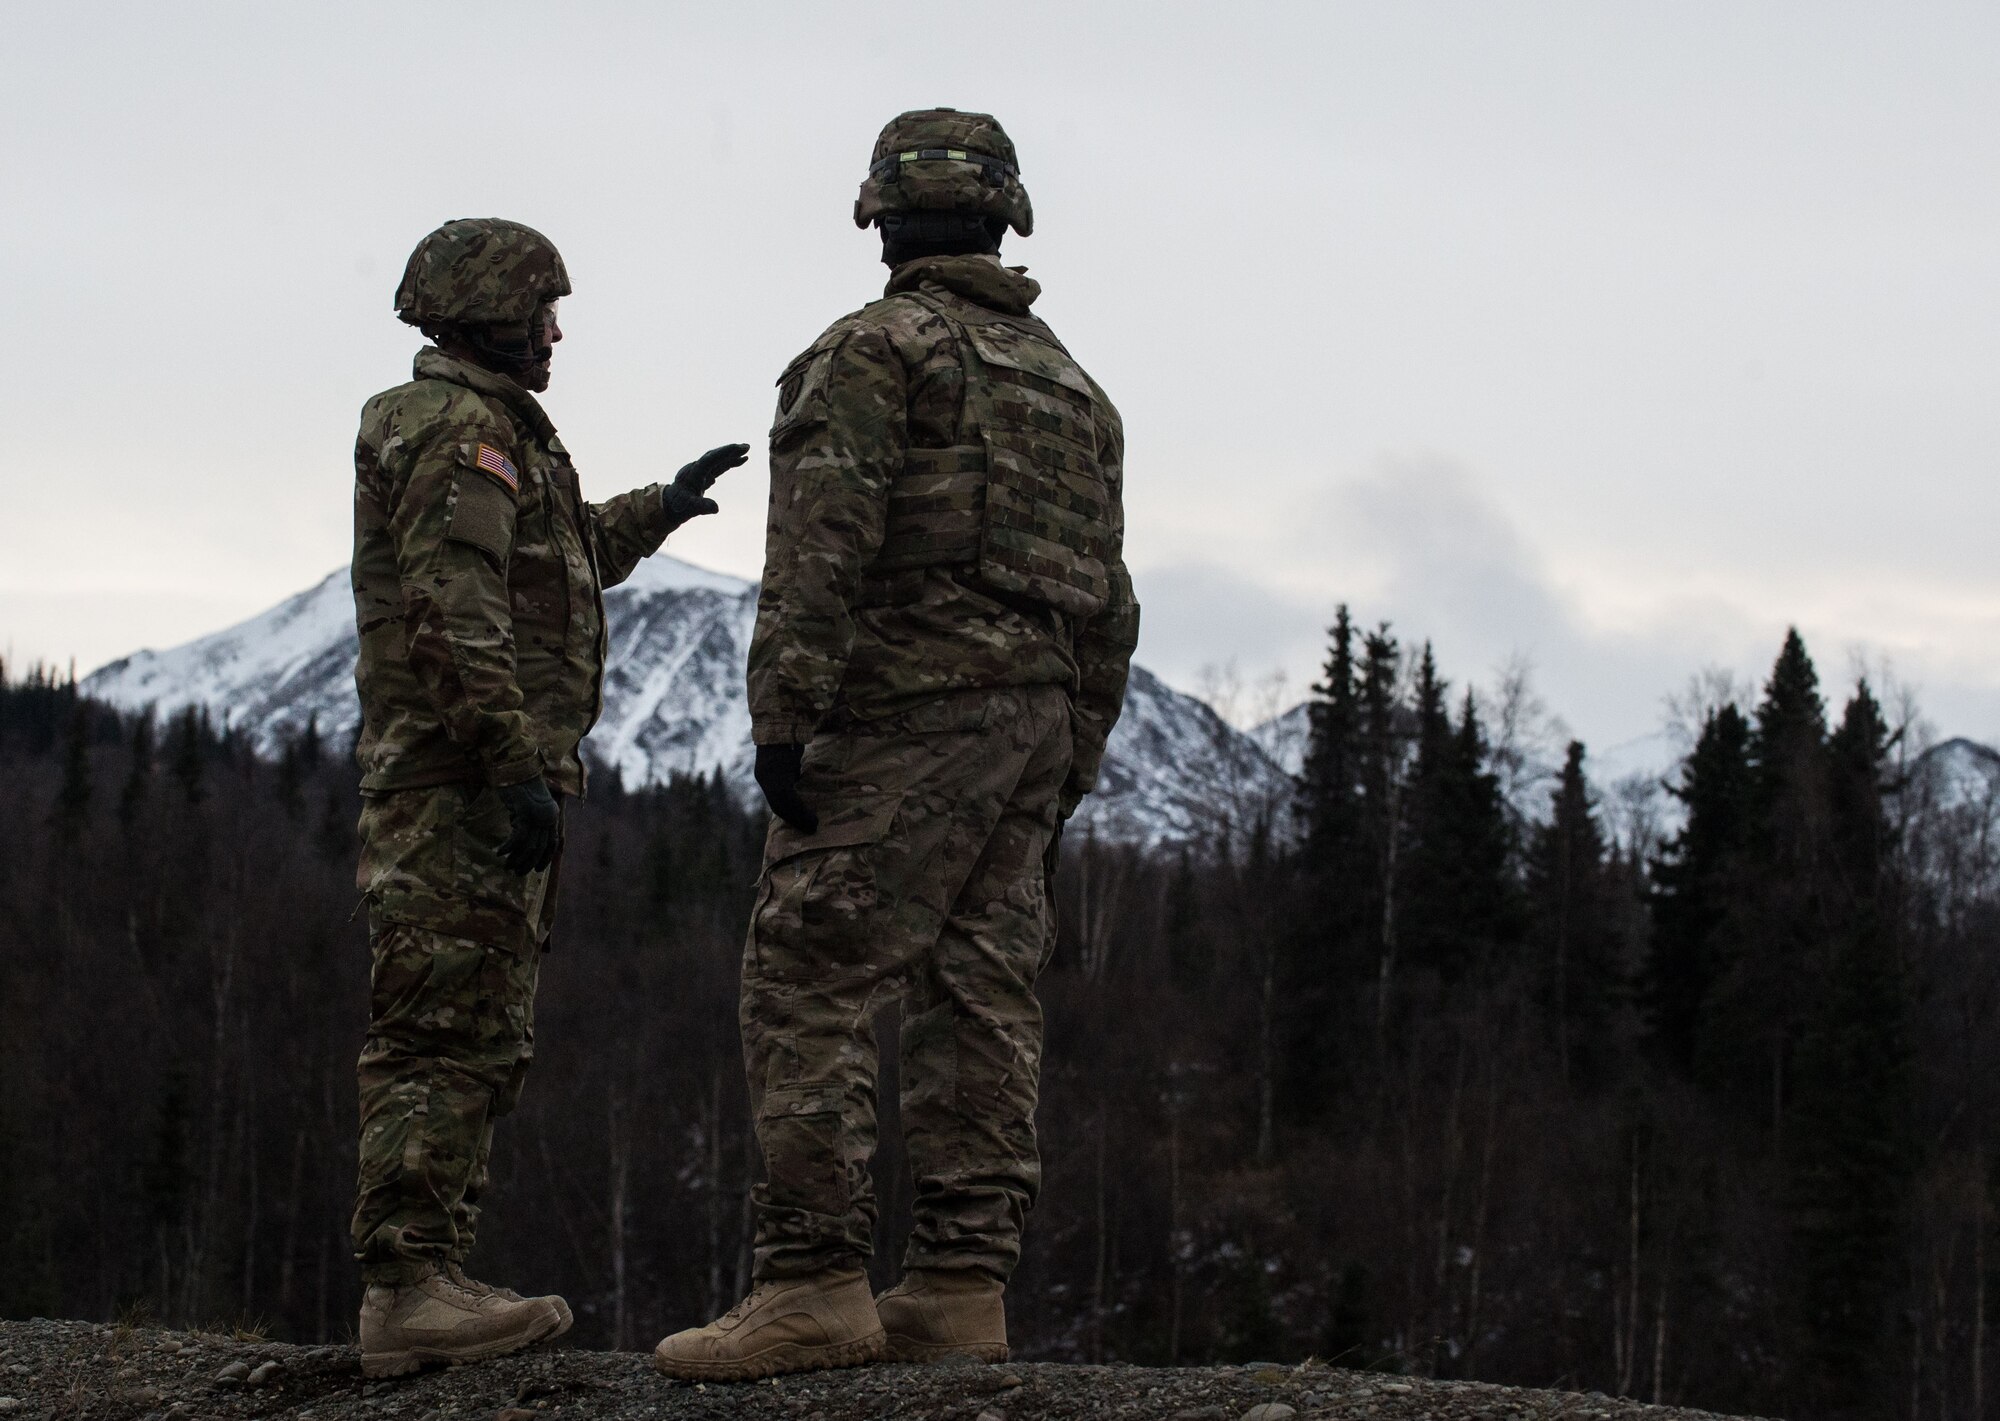 Paratroopers assigned to 3rd Battalion, 509th Parachute Infantry Regiment, 4th Infantry Brigade Combat Team (Airborne), 25th Infantry Division, U.S. Army Alaska, survey the scene before conducting M67 fragmentation grenade live fire training at Kraft Range on Joint Base Elmendorf-Richardson, Alaska, Dec. 12, 2017. A ‘pit’ noncommissioned officer supervised the Soldiers throwing grenades to maintain a safe instructional environment, enforce precaution standards, and direct them on proper handling of explosives. The fragmentation hand grenade has a lethal radius of five meters and can produce casualties up to 15 meters, dispersing fragments as far as 230 meters.